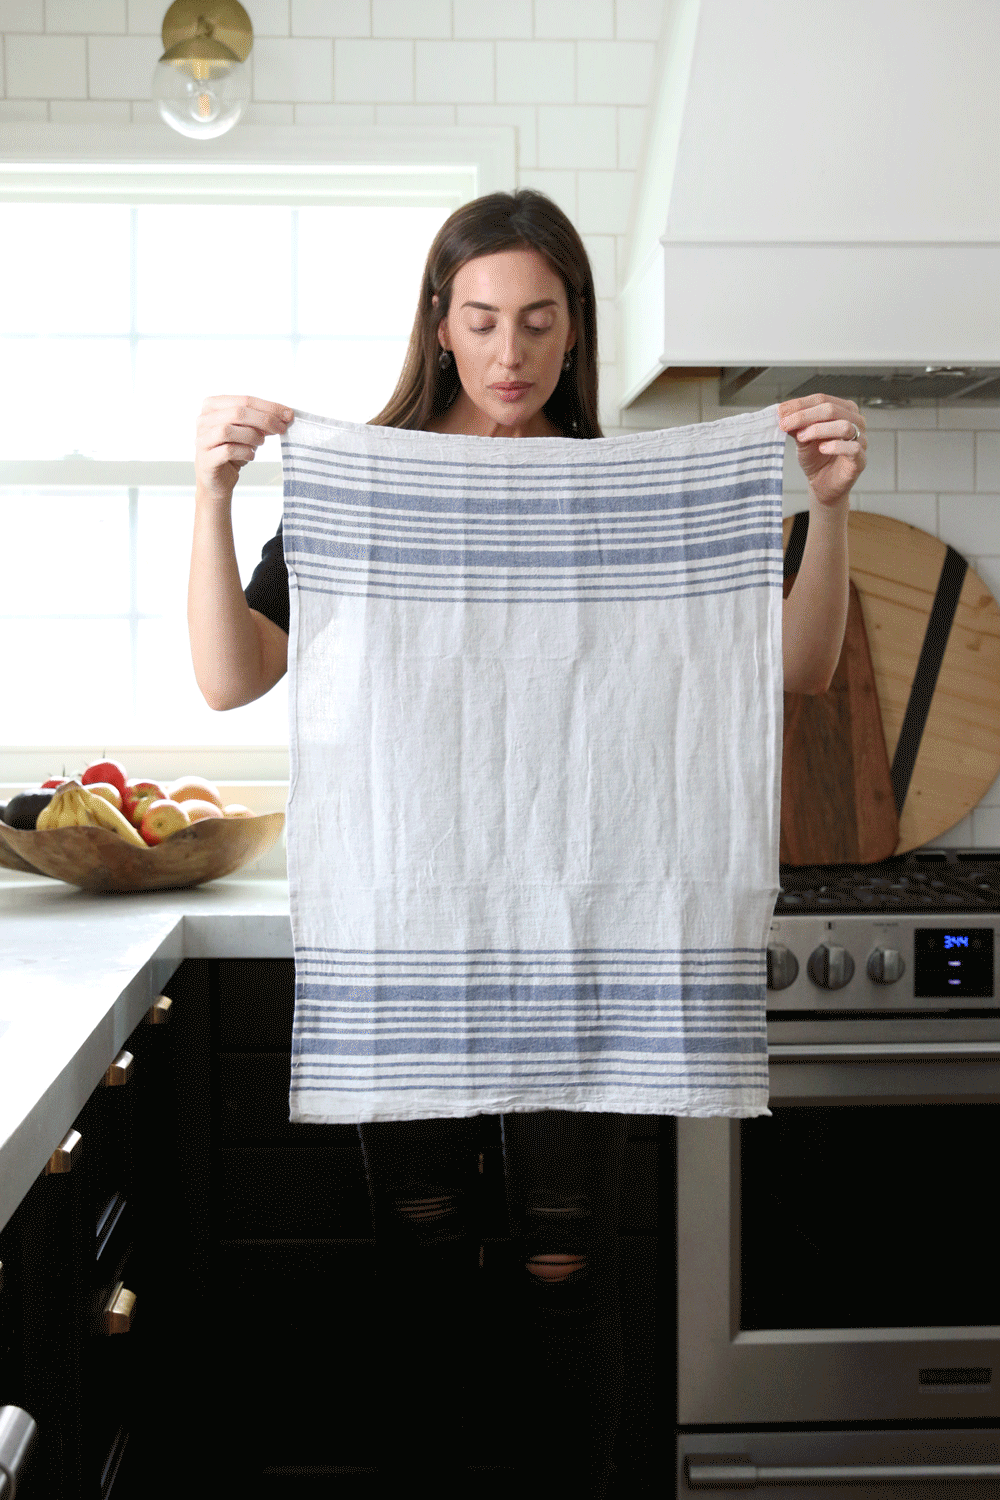 Putting Kitchen Towels to the Test - Chris Loves Julia